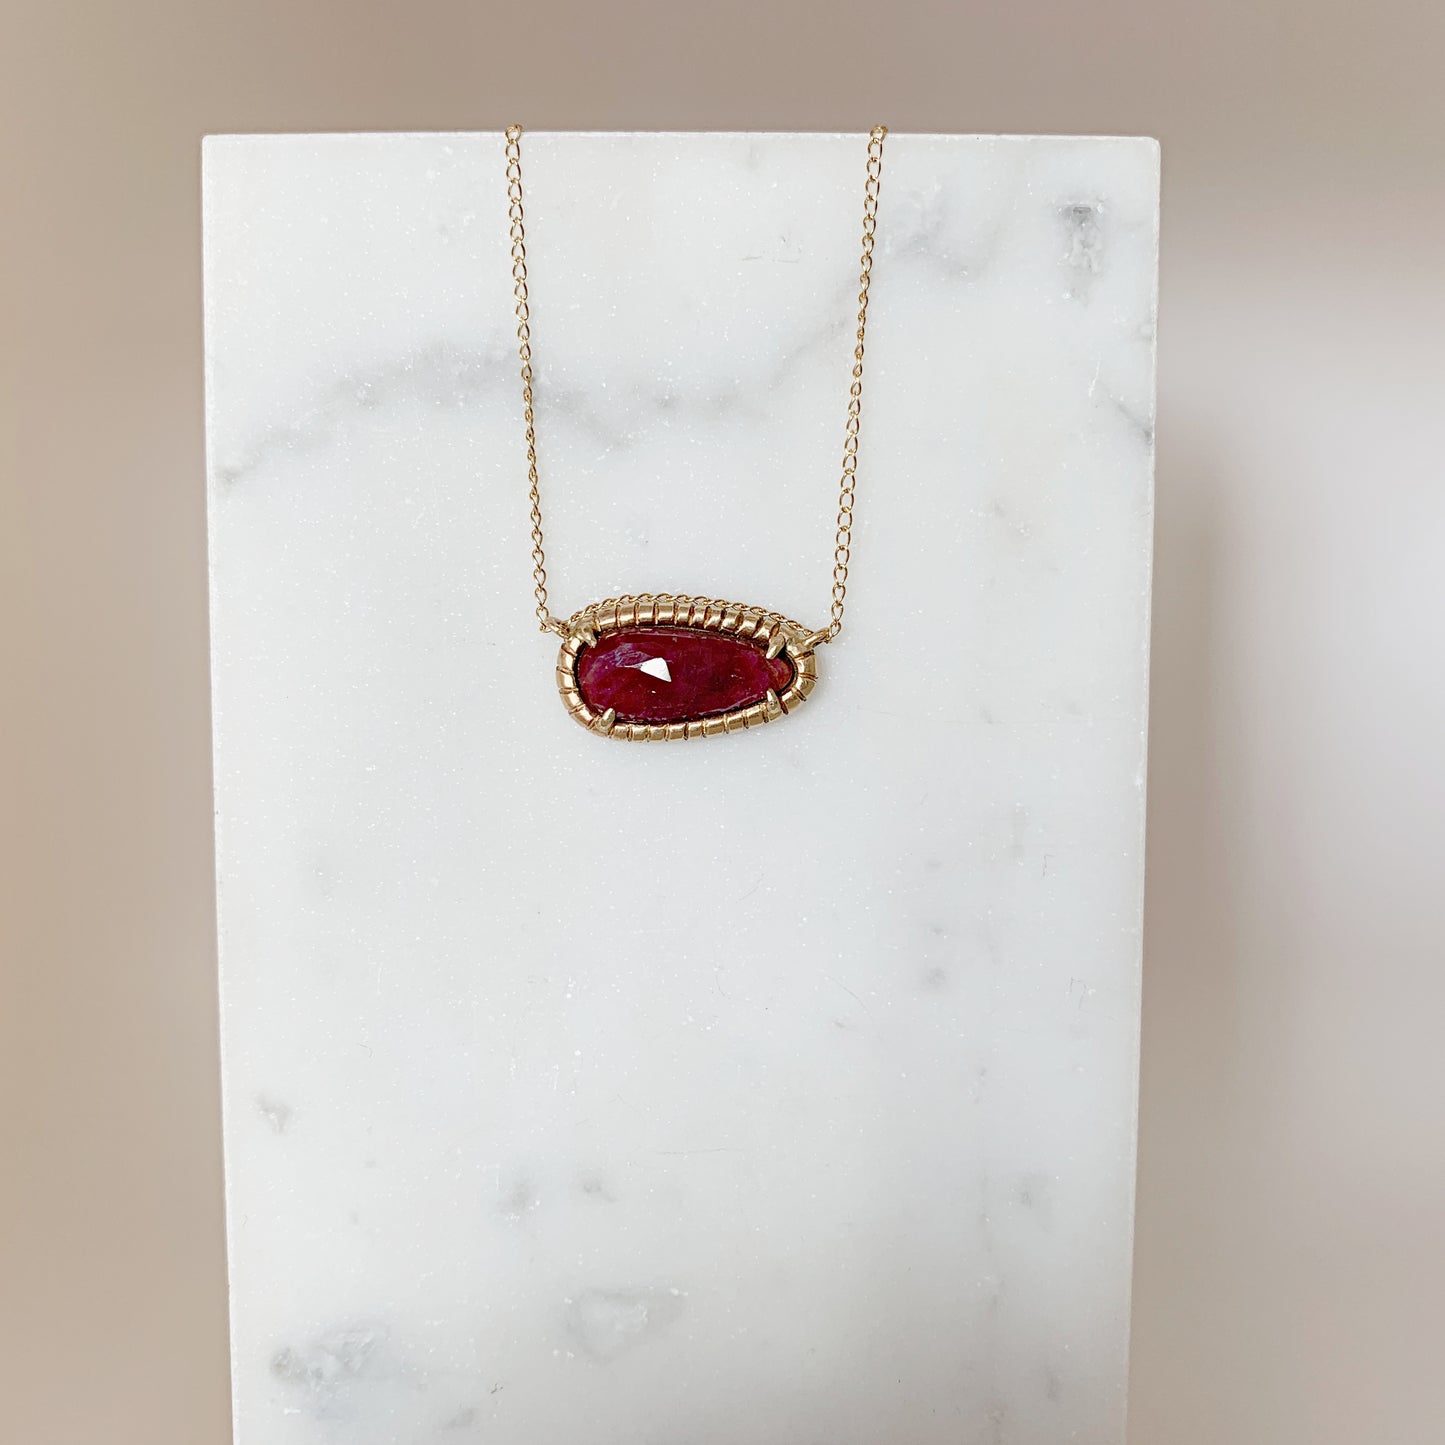 Soleil Pendant Necklace with Ruby in 14k gold